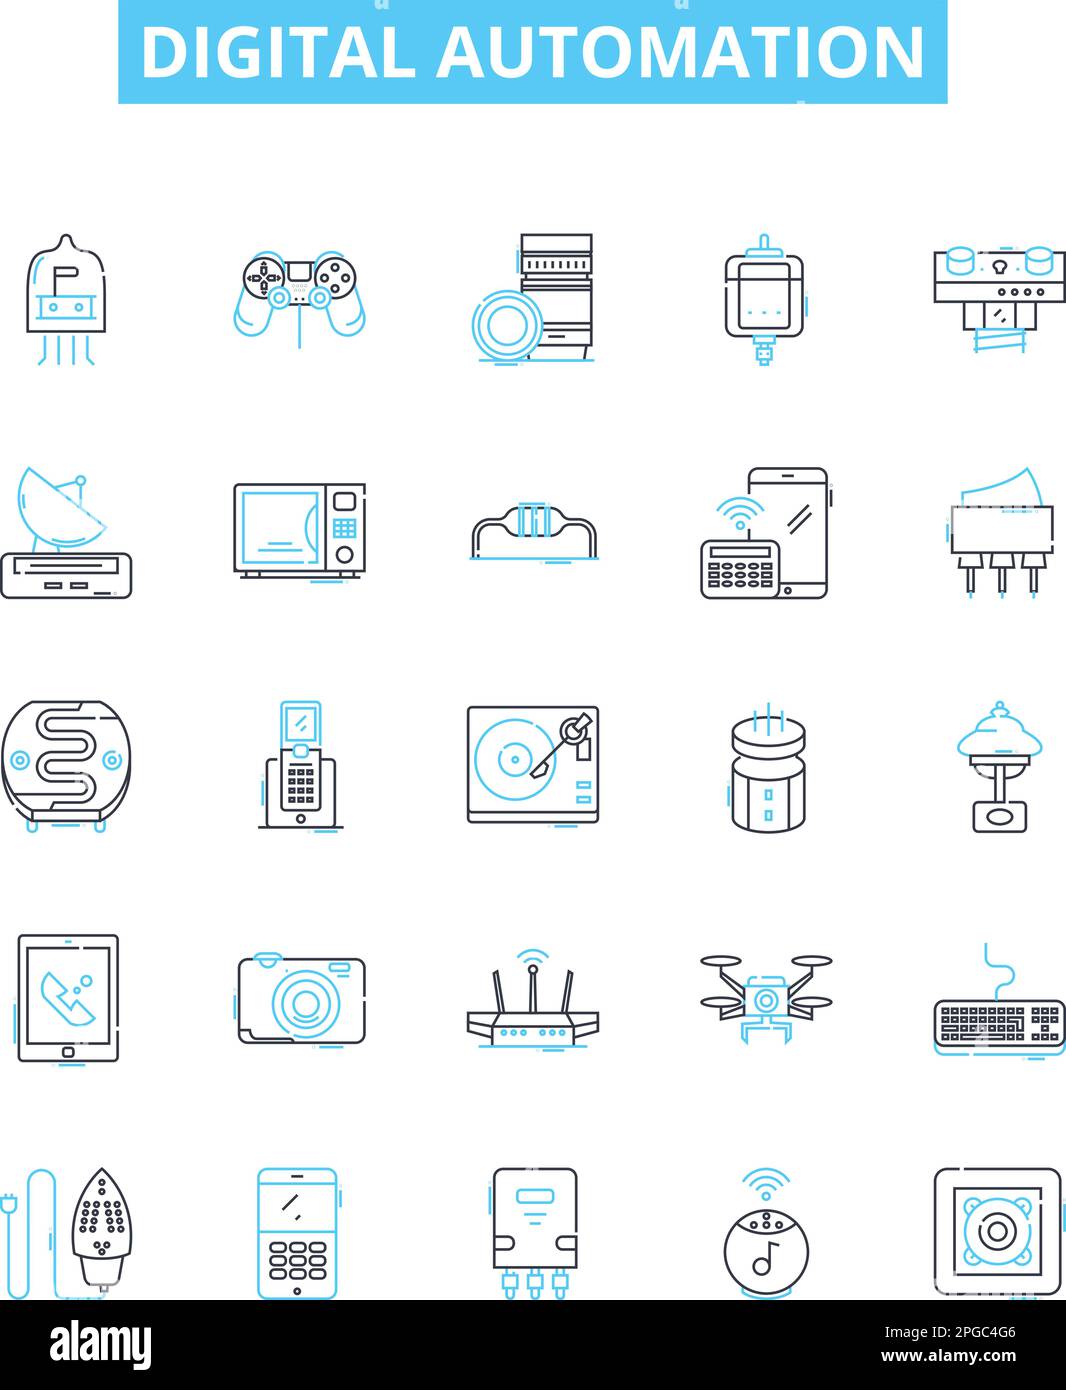 Digital automation vector line icons set. Digital, Automation, Robotics, AI, Machine-Learning, Objects, Control illustration outline concept symbols Stock Vector